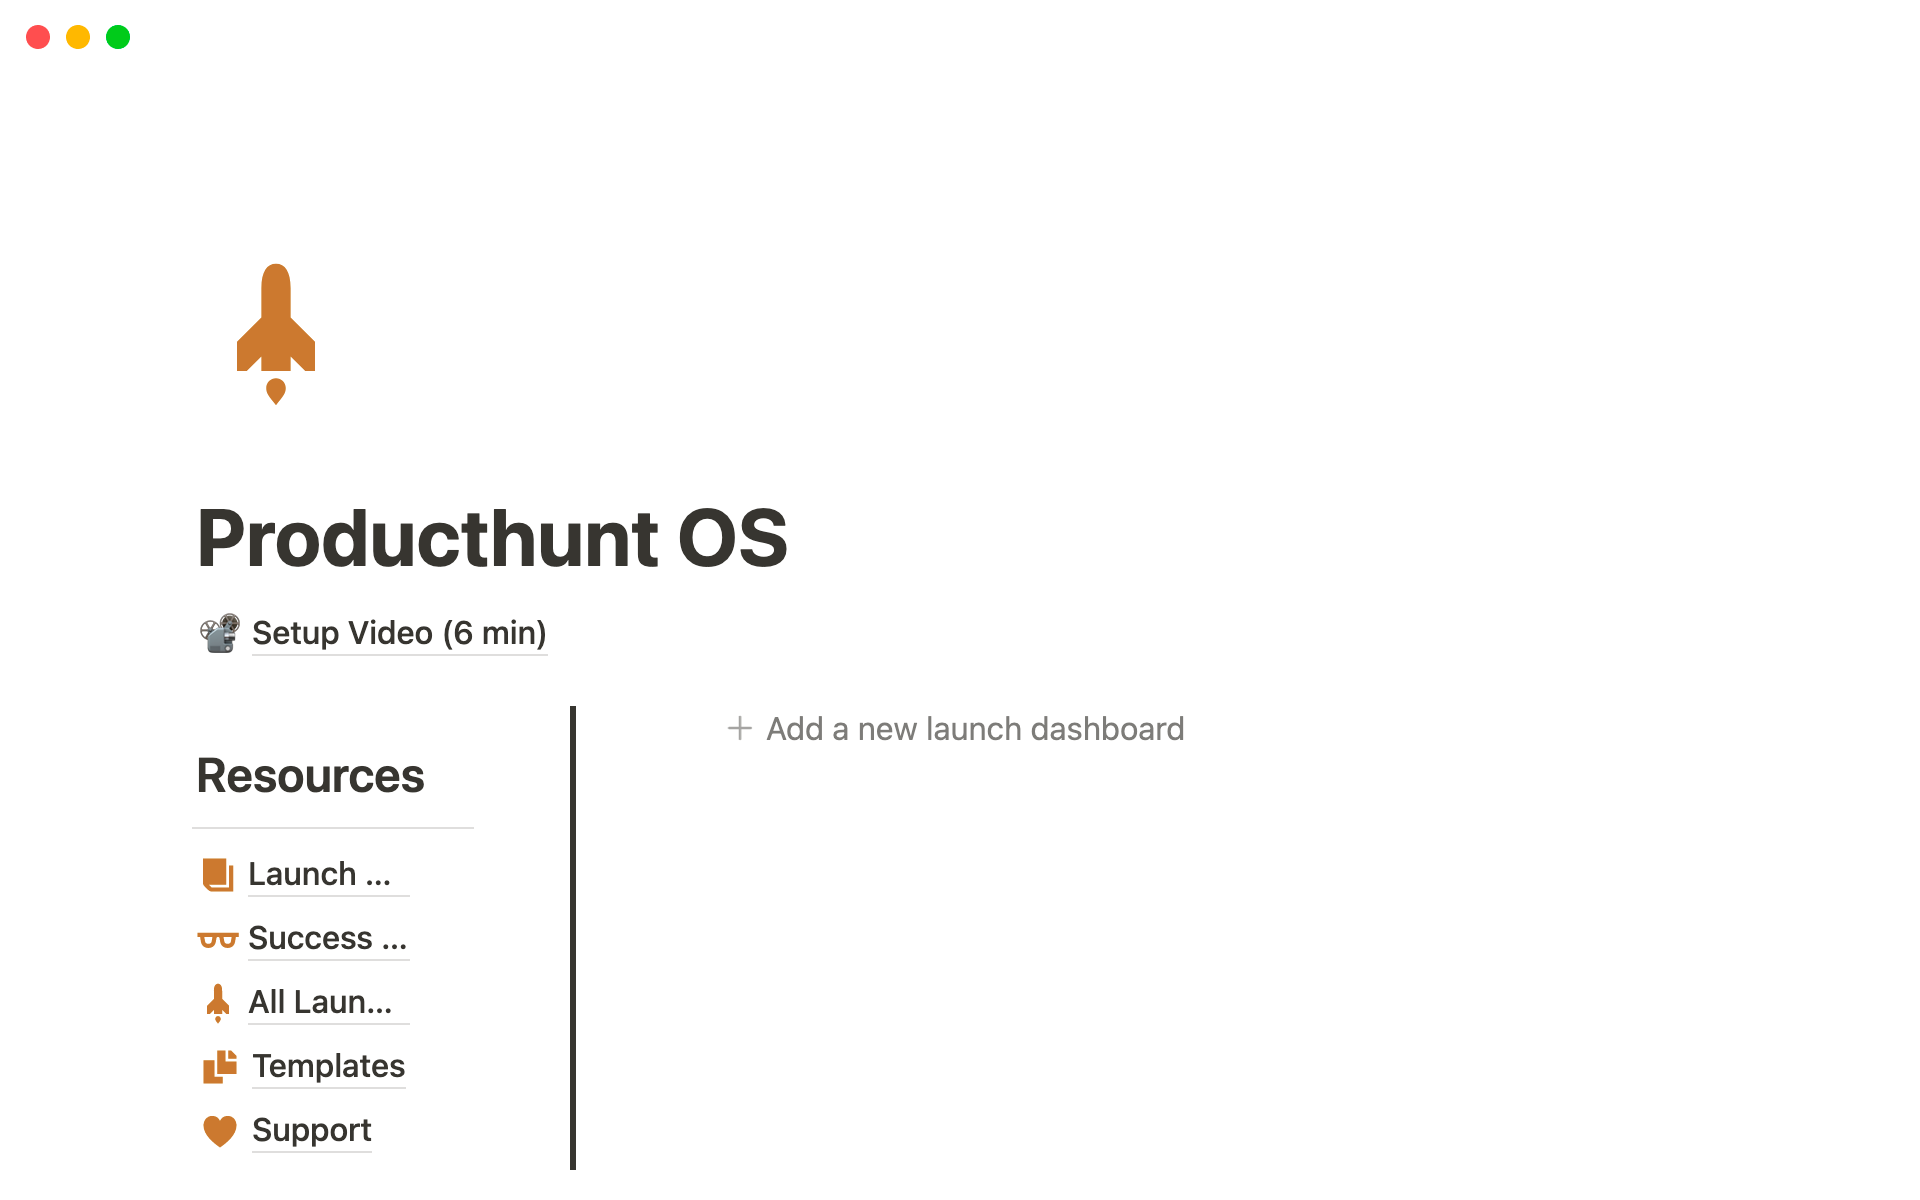 Operating System to organize your Producthunt Launch and reach top placements